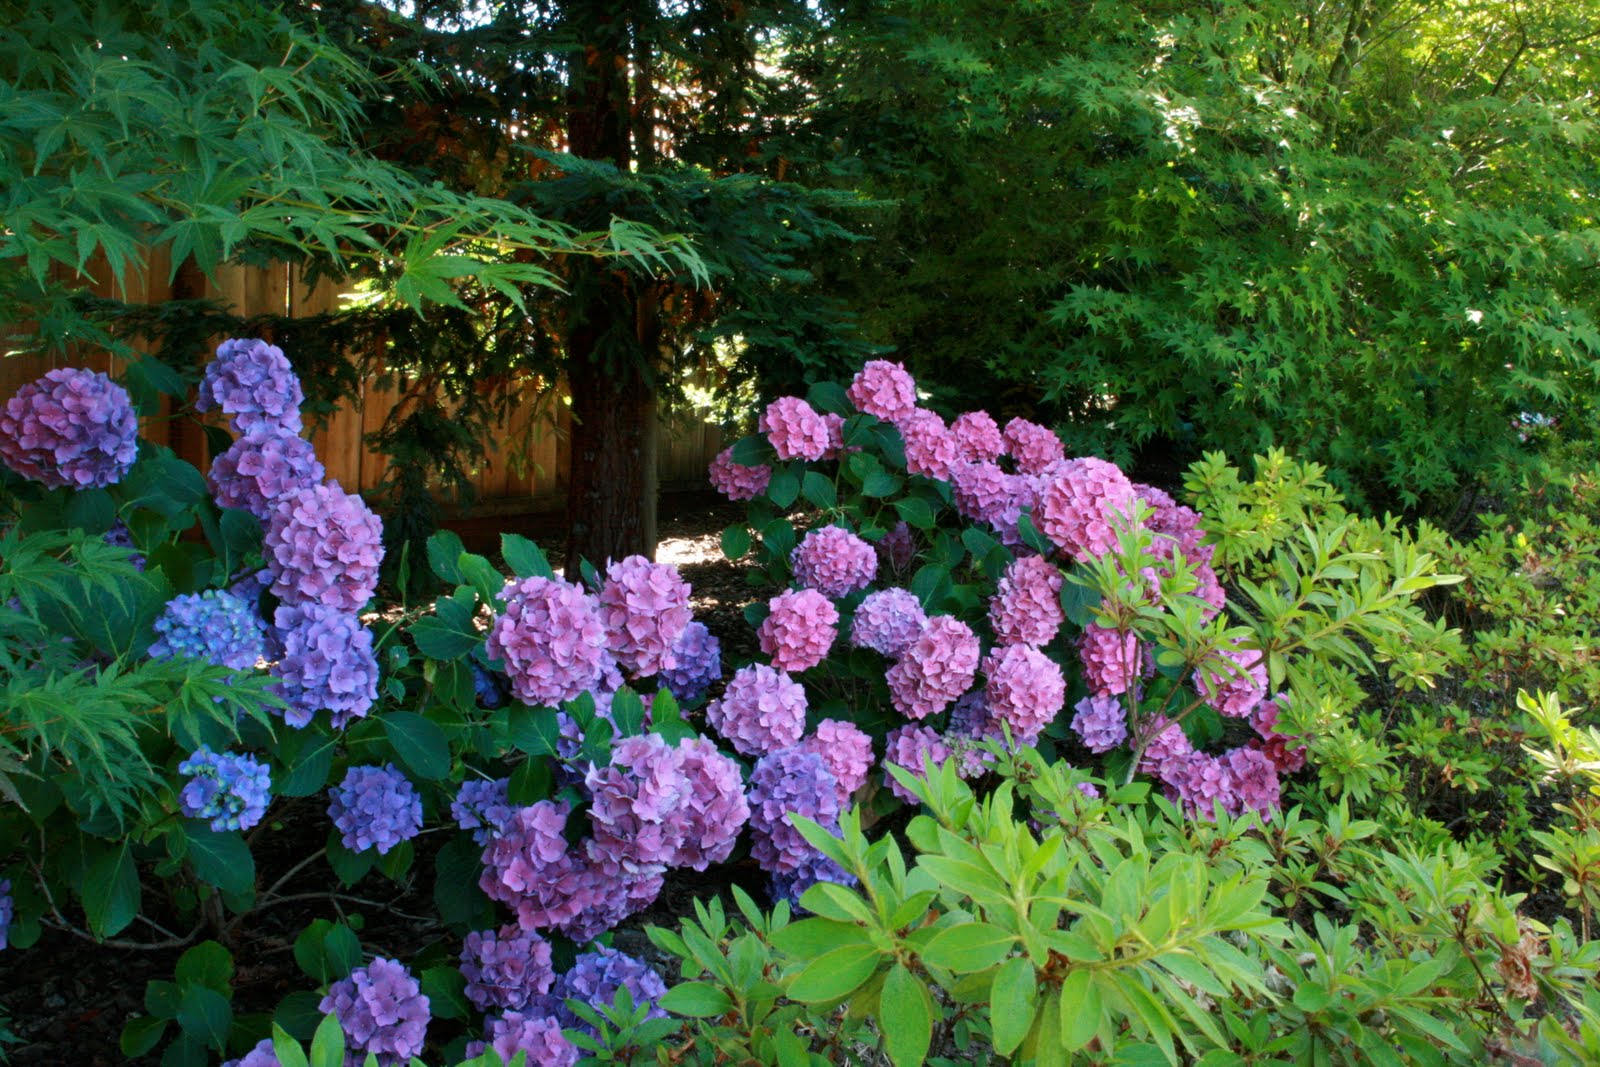 Image of Japanese maples and hydrangeas